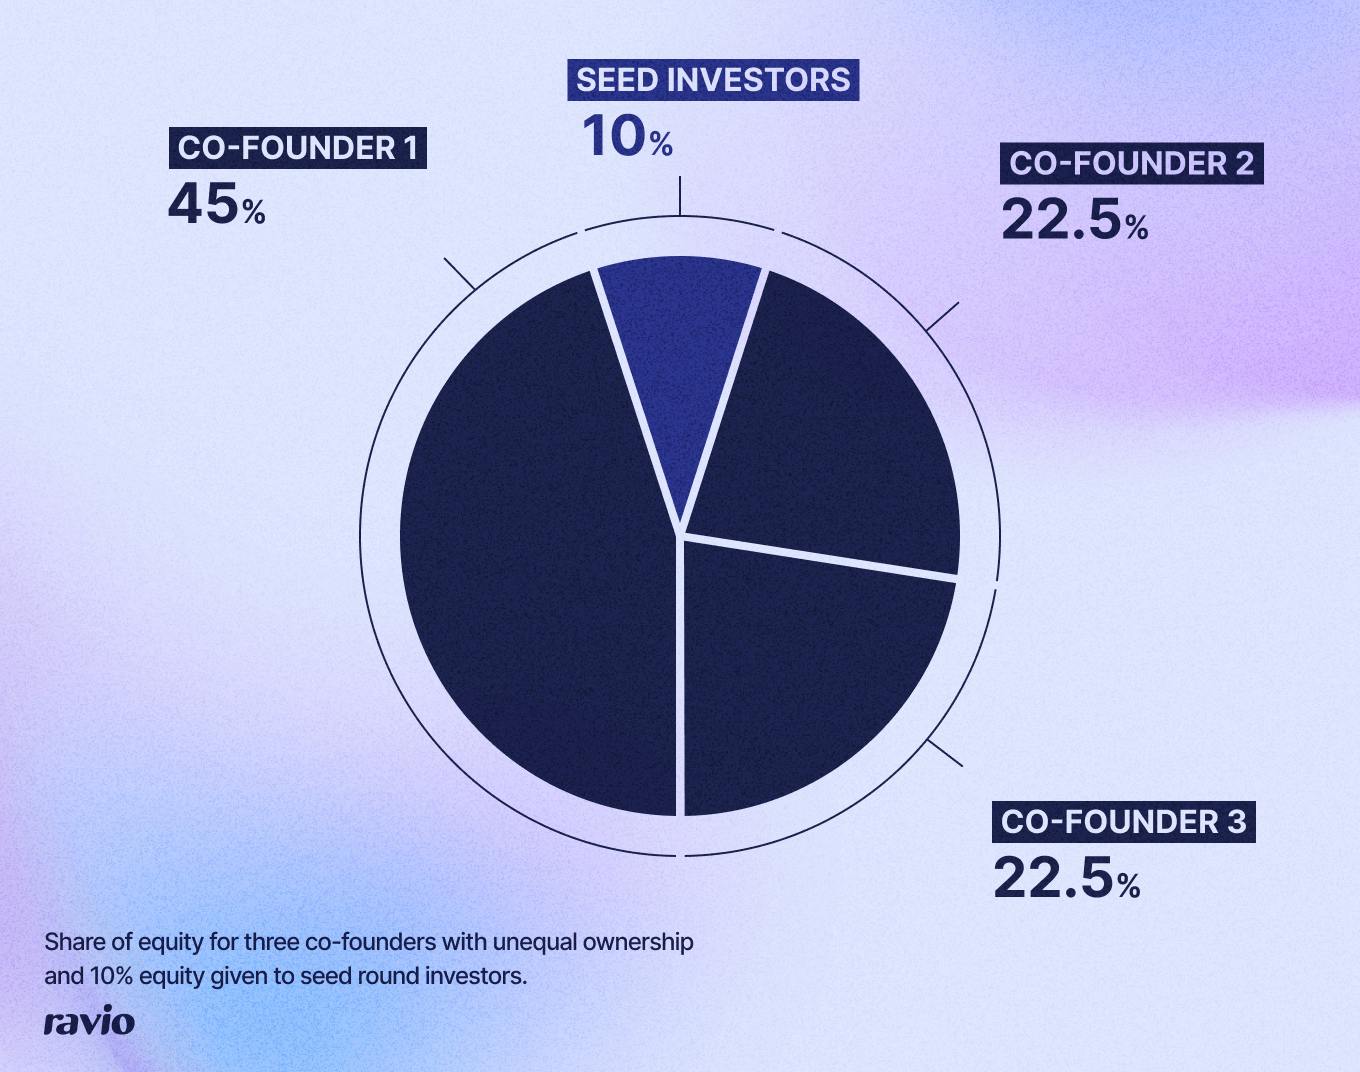 Pie chart showing 45% equity to co-founder 1, 22.5% to co-founders 2 and 3, 10% equity to seed investors